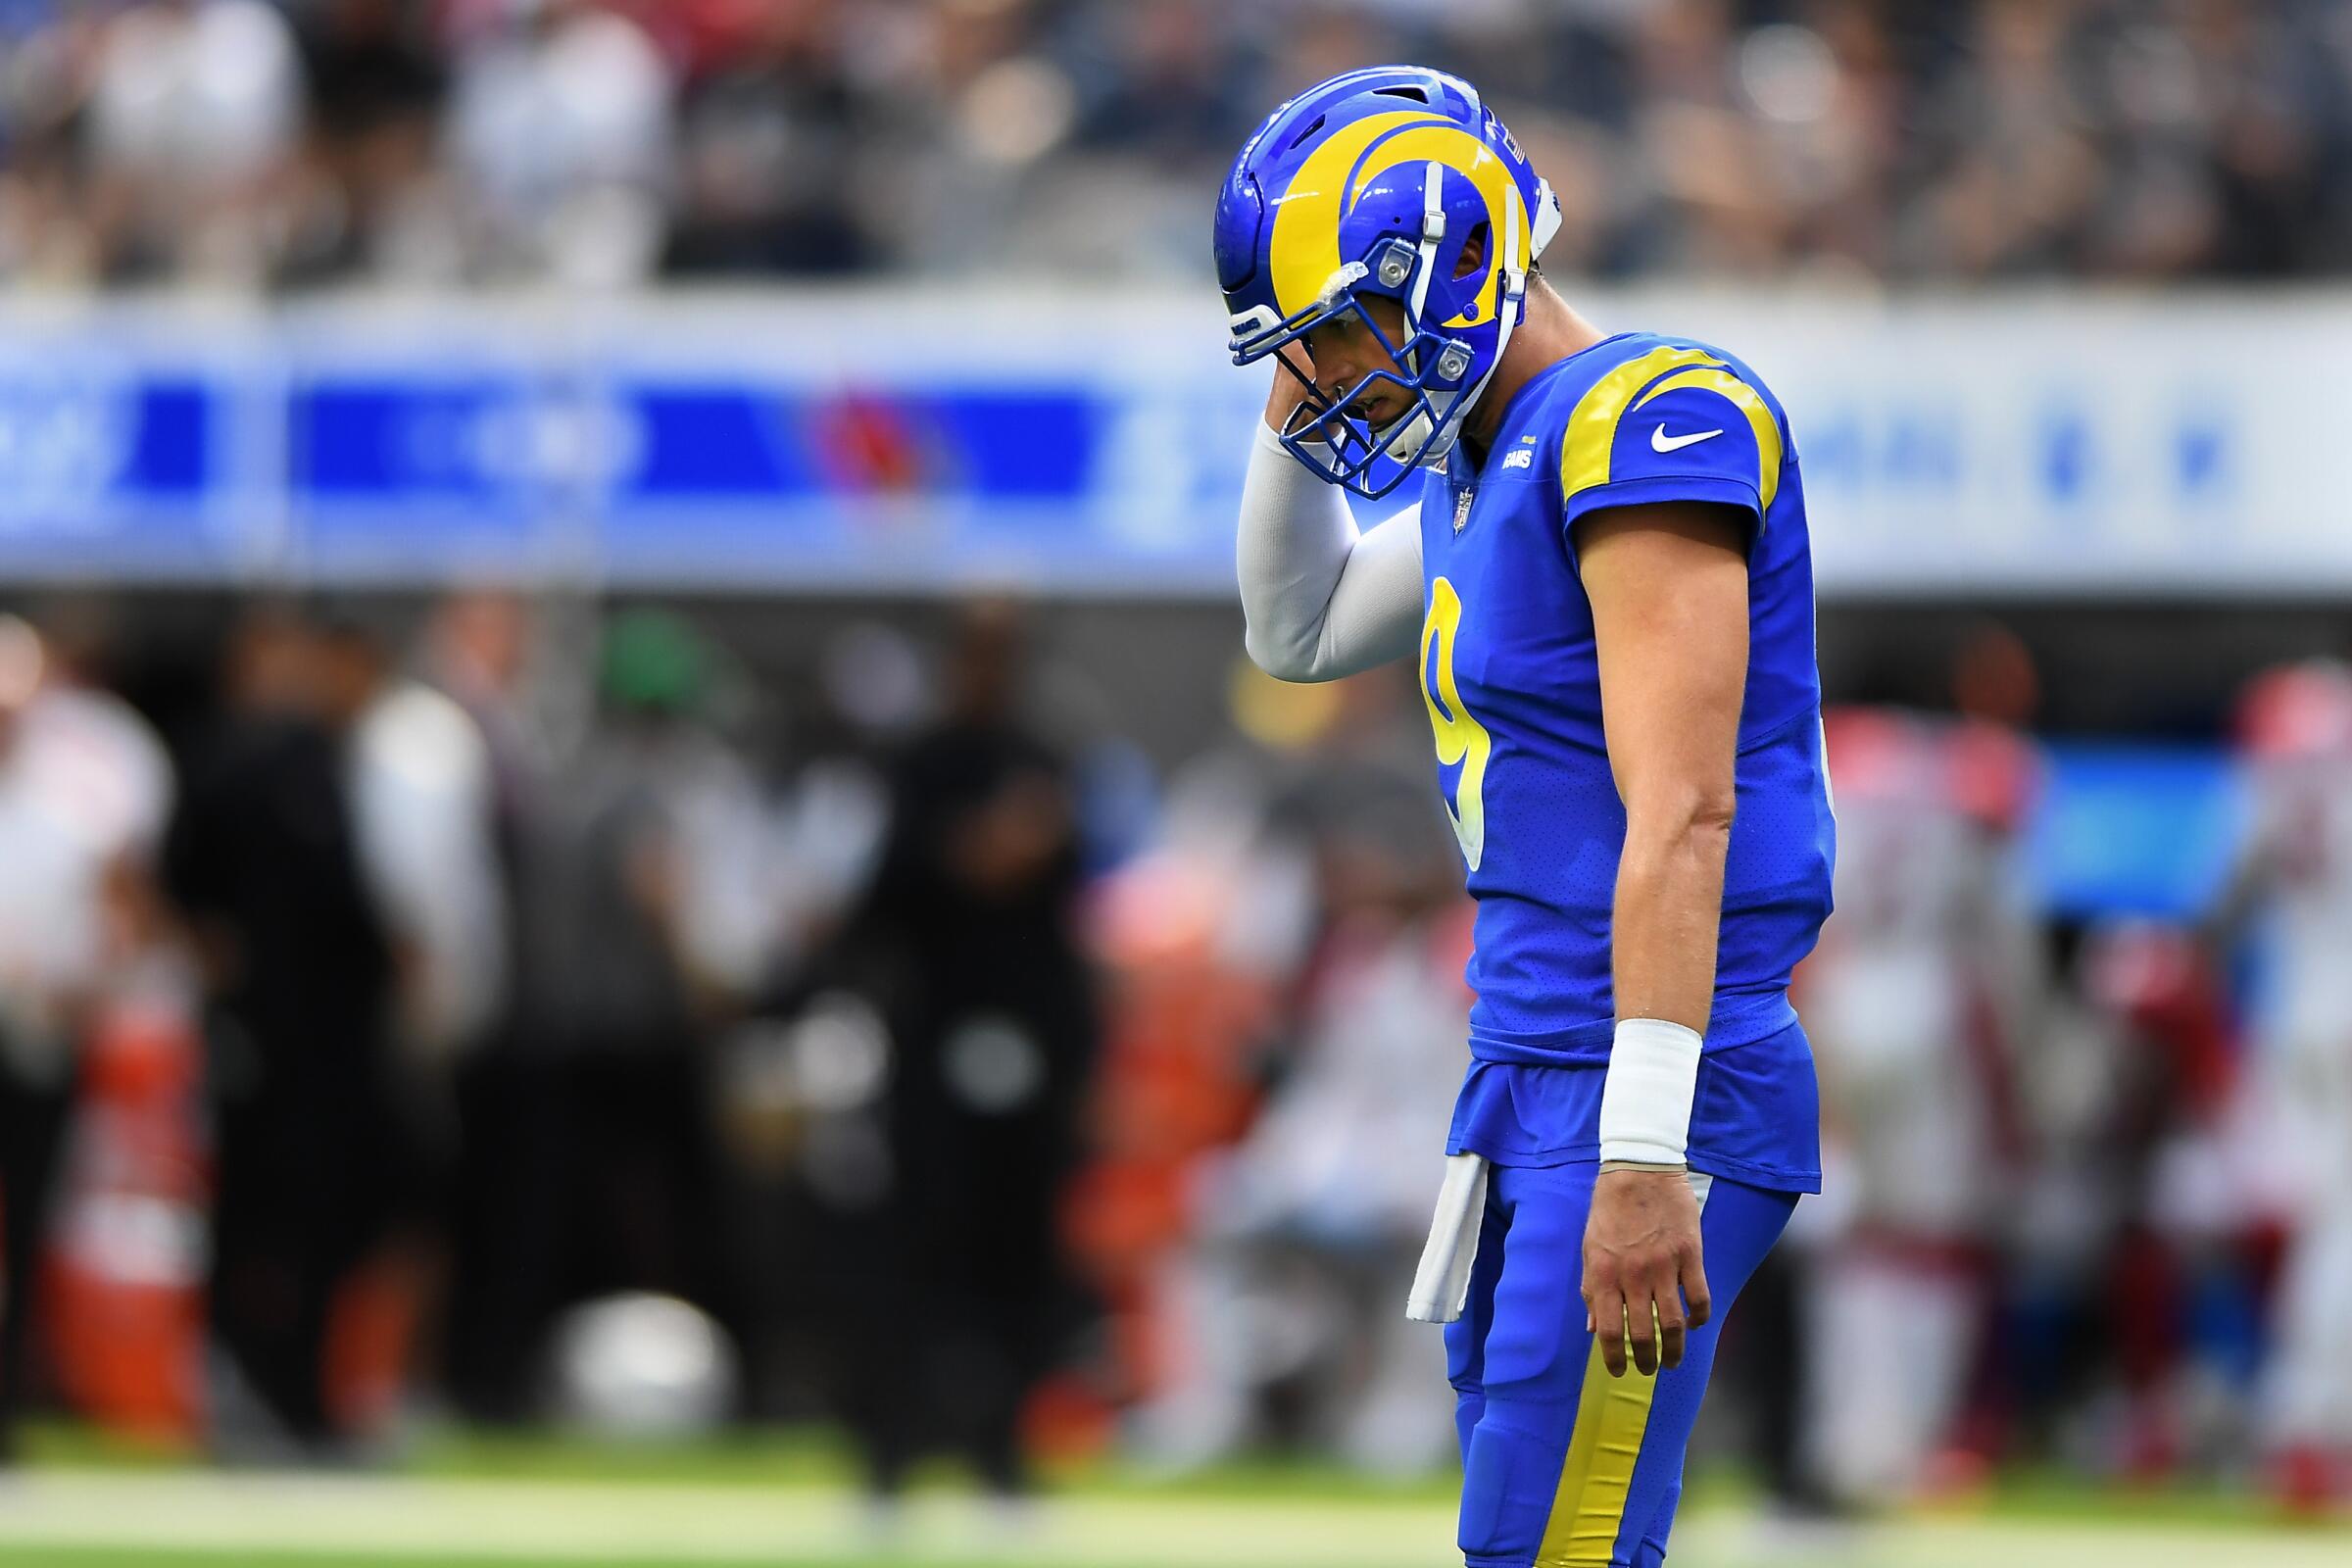 Rams quarterback Matthew Stafford walks off the field after throwing an incomplete pass.